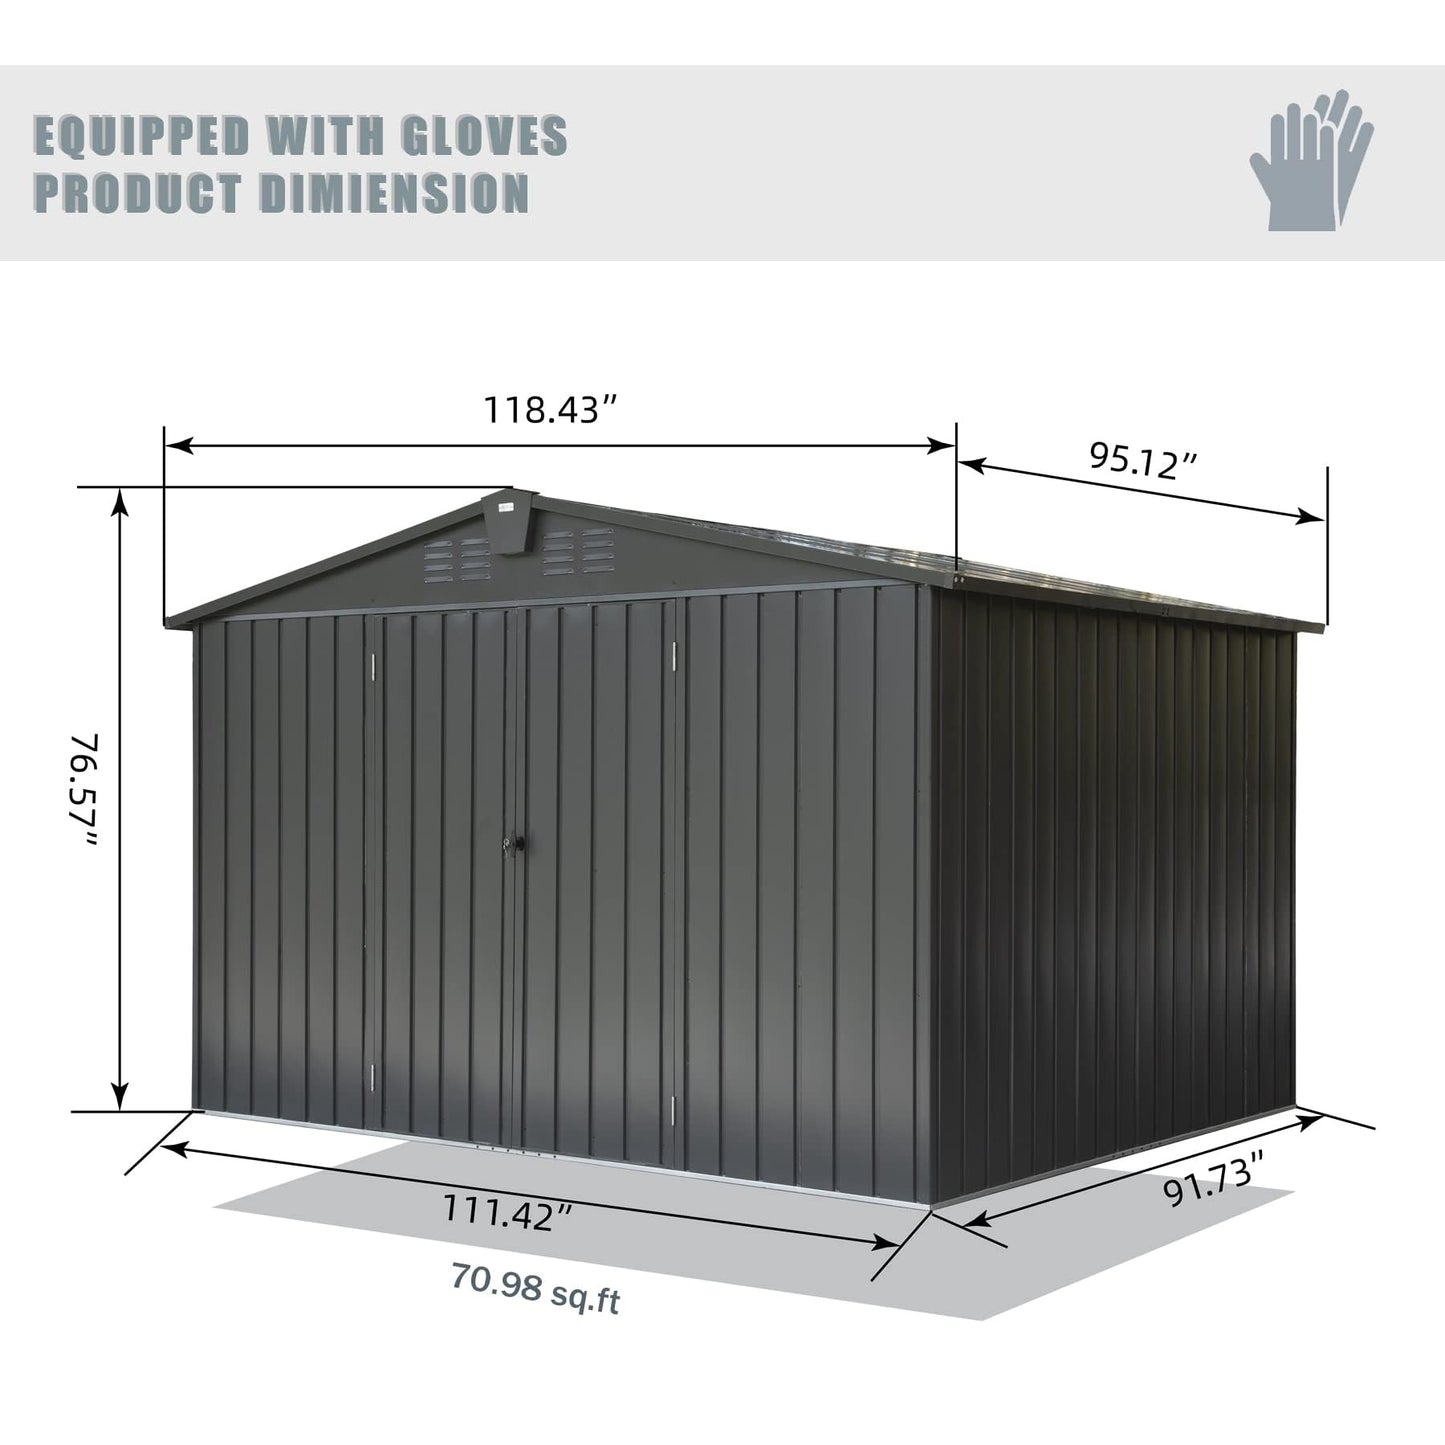 Domi Backyard Storage Shed 9.8’ x 7.9’ with Galvanized Steel Frame,Outdoor Garden Shed Metal Utility Tool Storage Room with Latches and Lockable Door for Balcony Lawn Poolside (Dark Gray) 10' x 8' Gable Roof